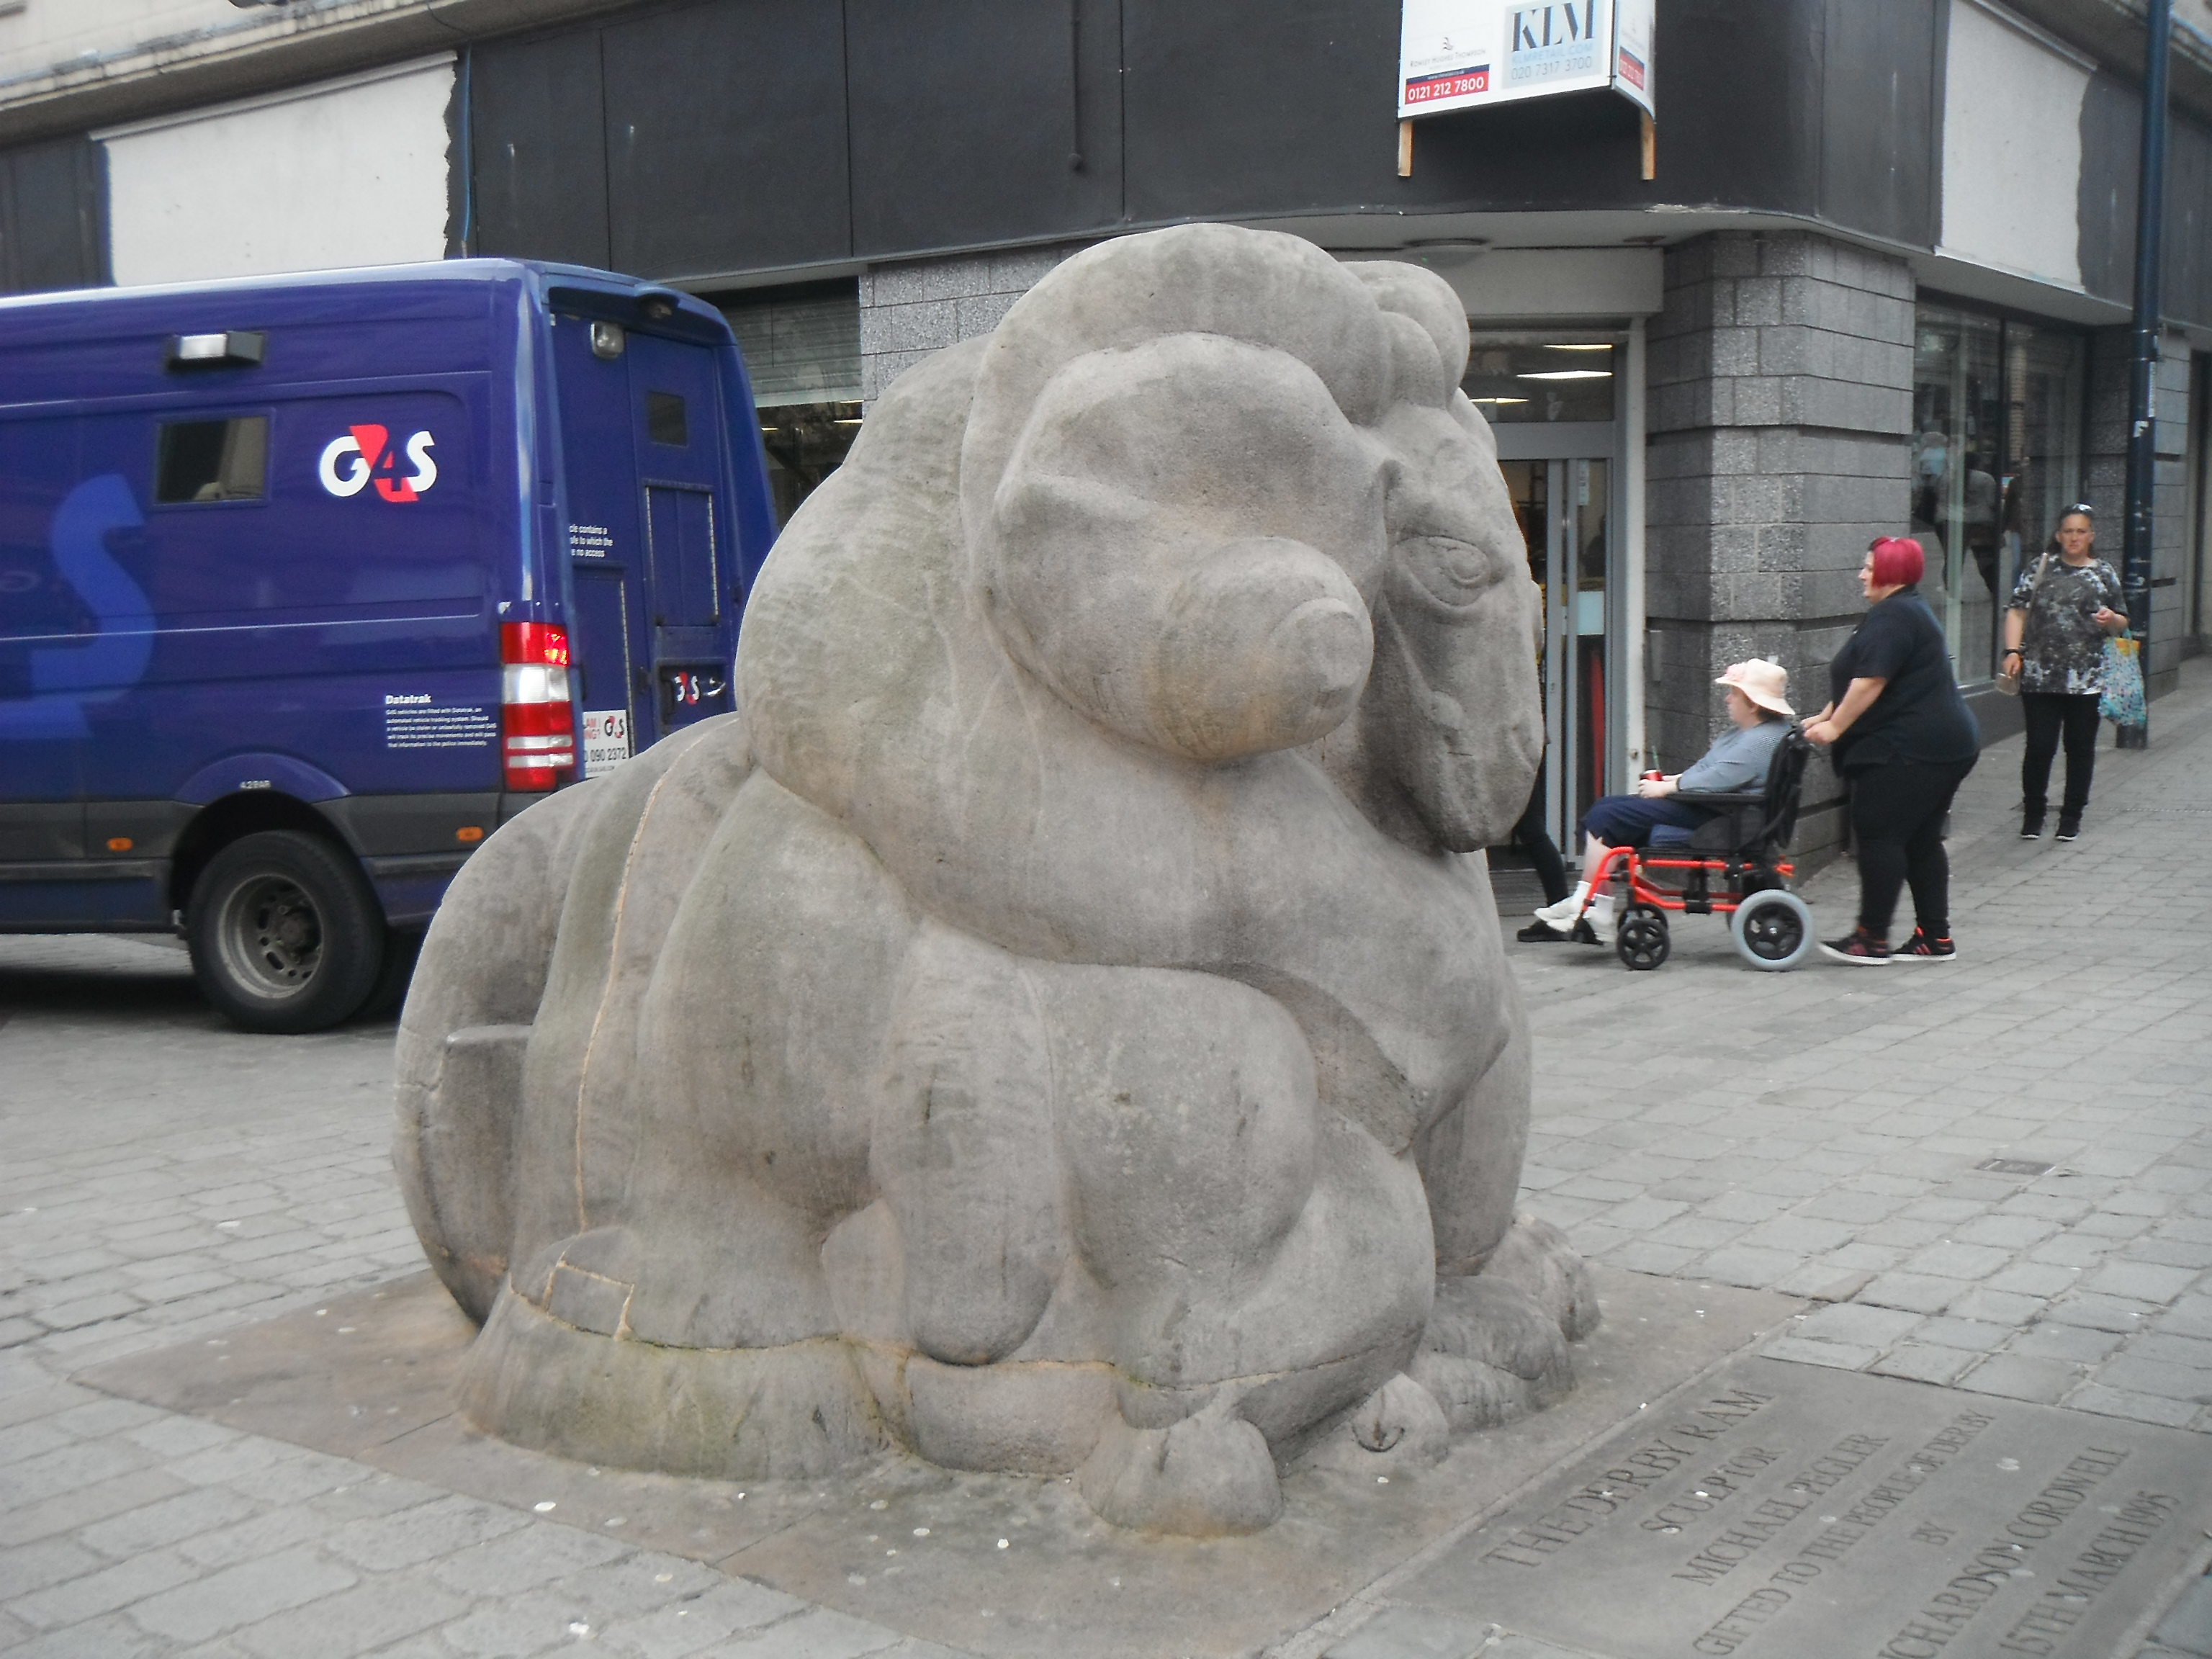 Photo taken by me – The Derby Ram, symbol of the city of Derby 